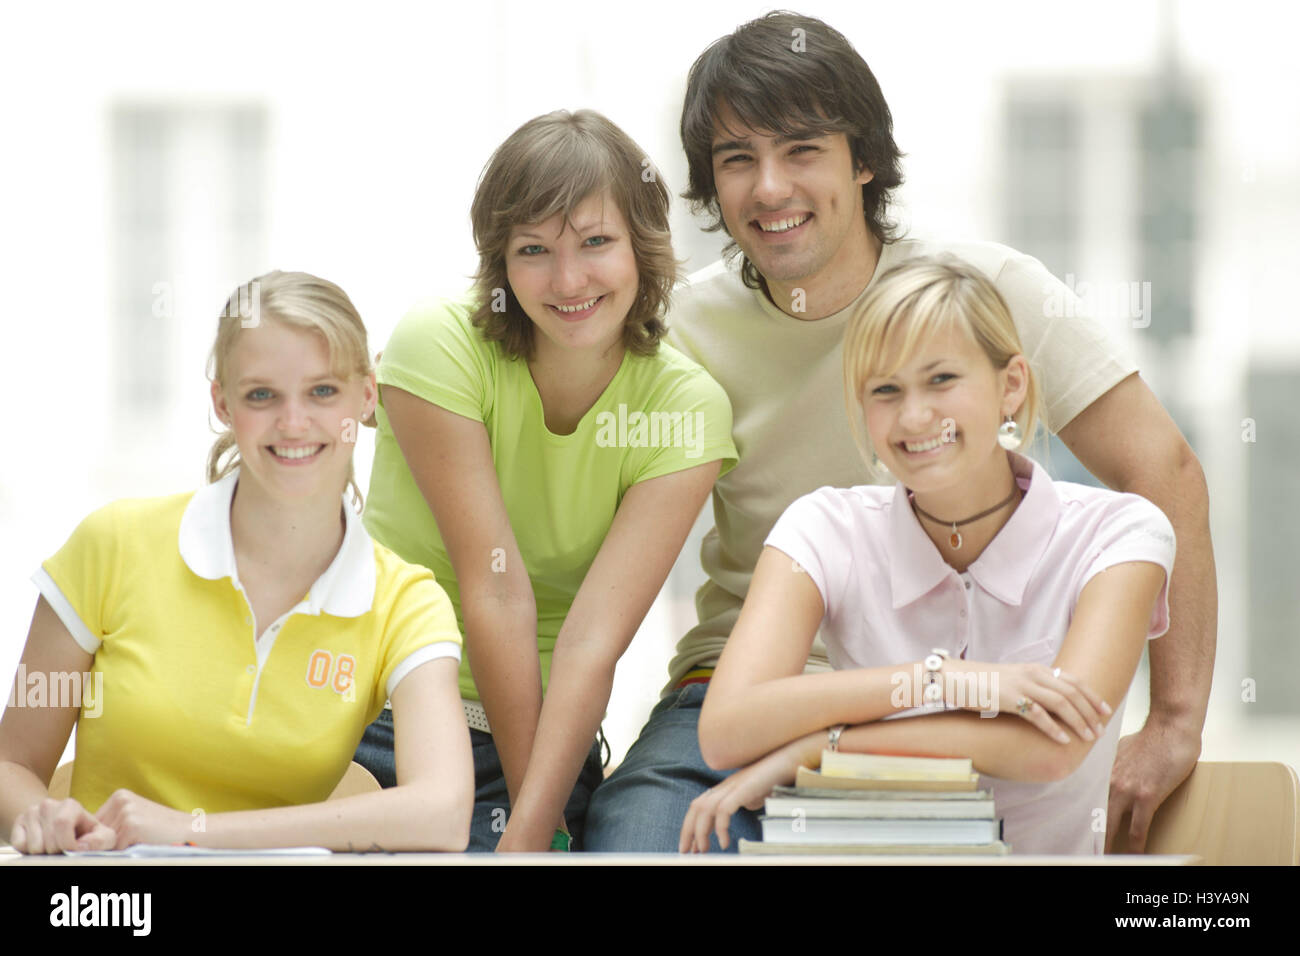 schoolchildren, learning, happy, school documents, together, group picture Stock Photo